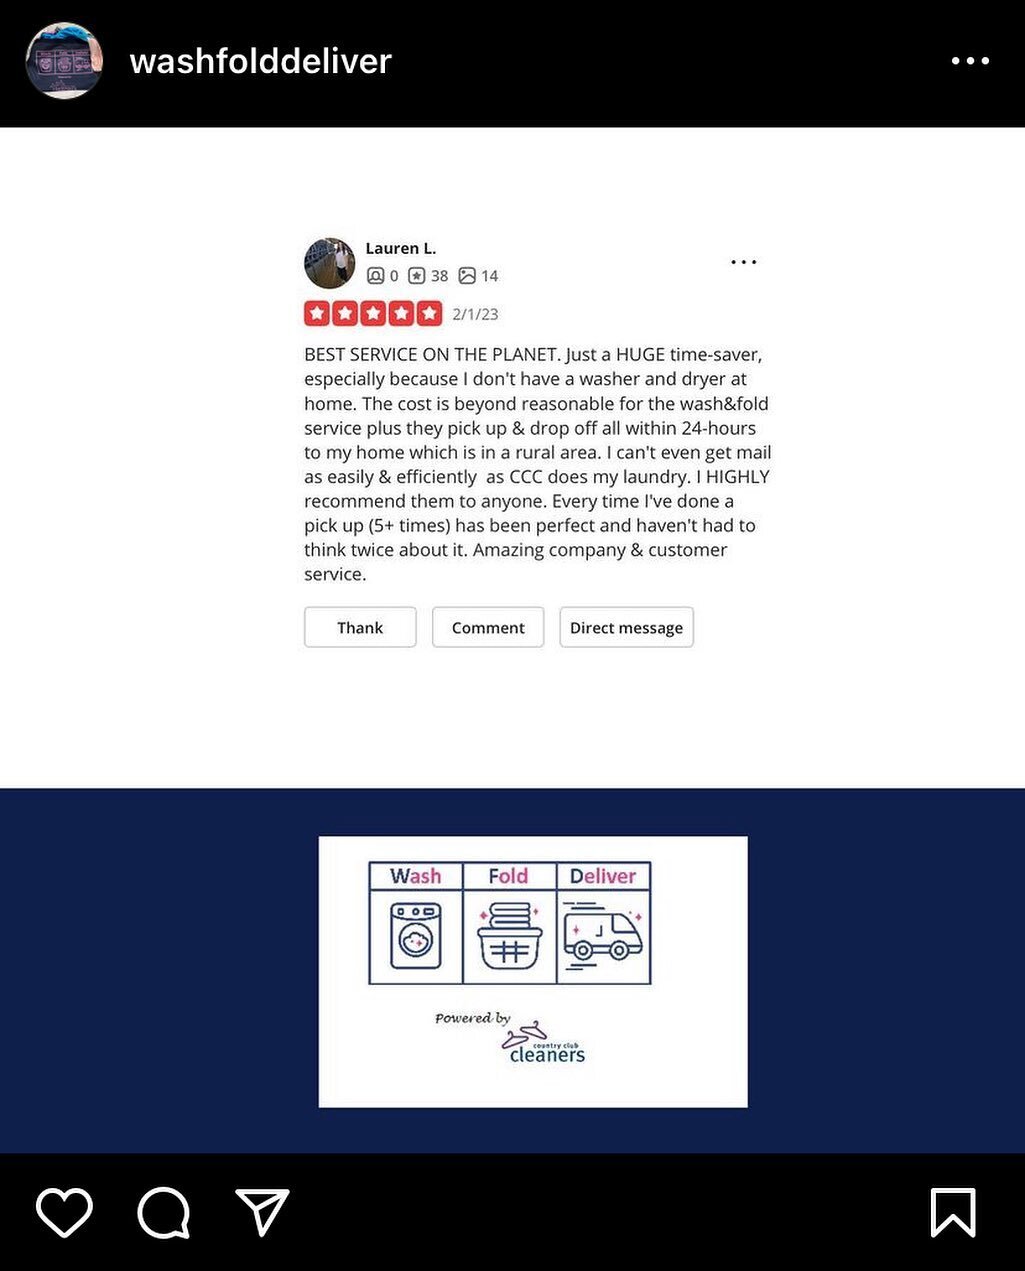 Awesome review for our wash and fold service! Providing next day delivery in San Ramon, Danville, Diablo, Blackhawk, Dublin, Pleasanton, Livermore and Alamo!  Thanks for the awesome review Lauren!